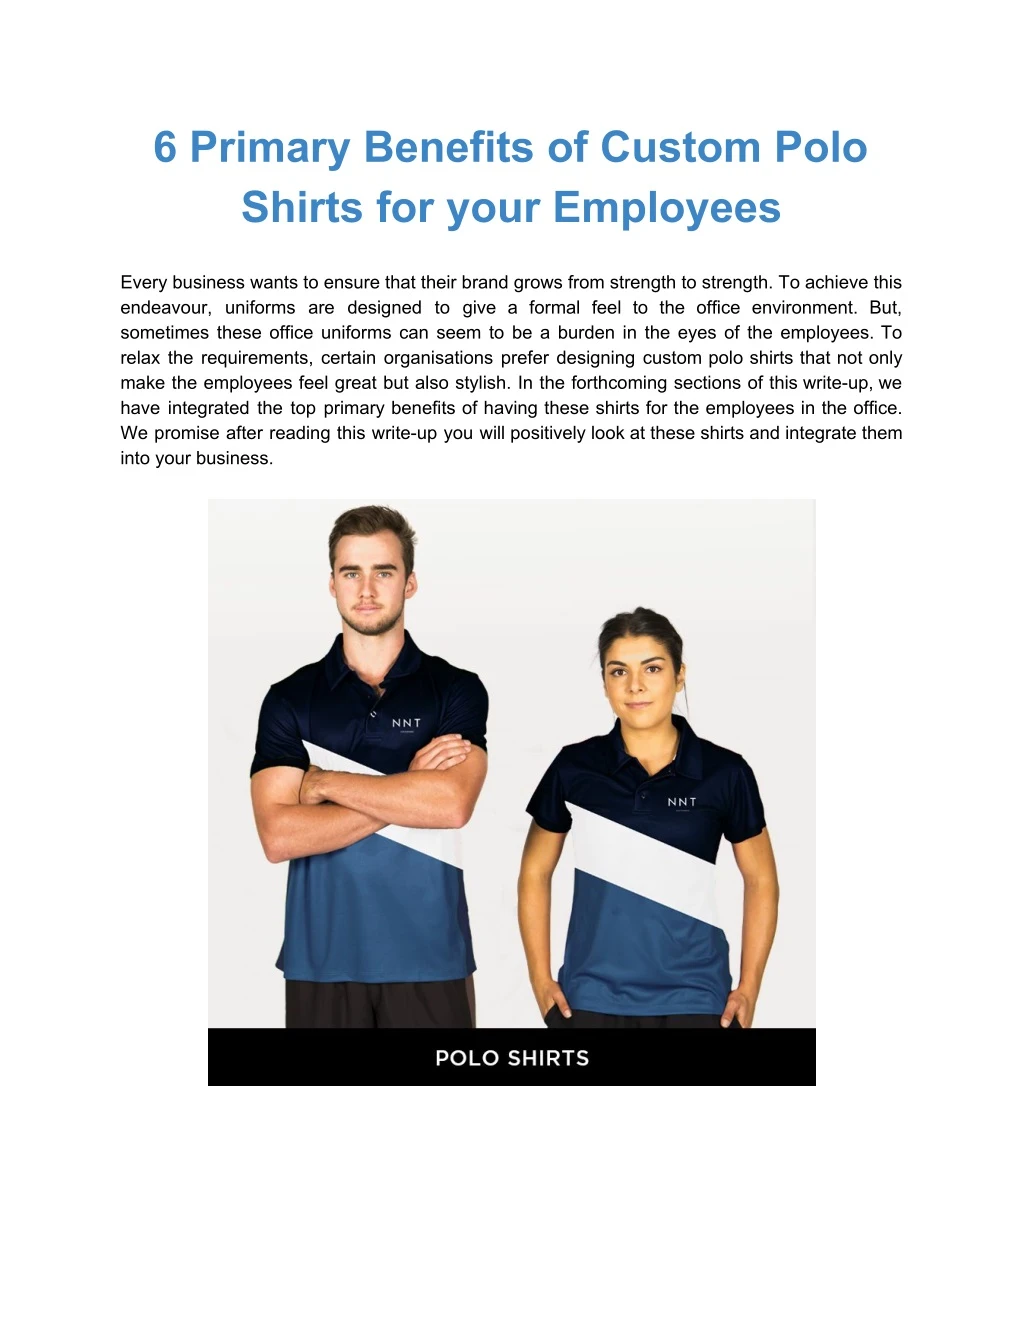 6 primary benefits of custom polo shirts for your